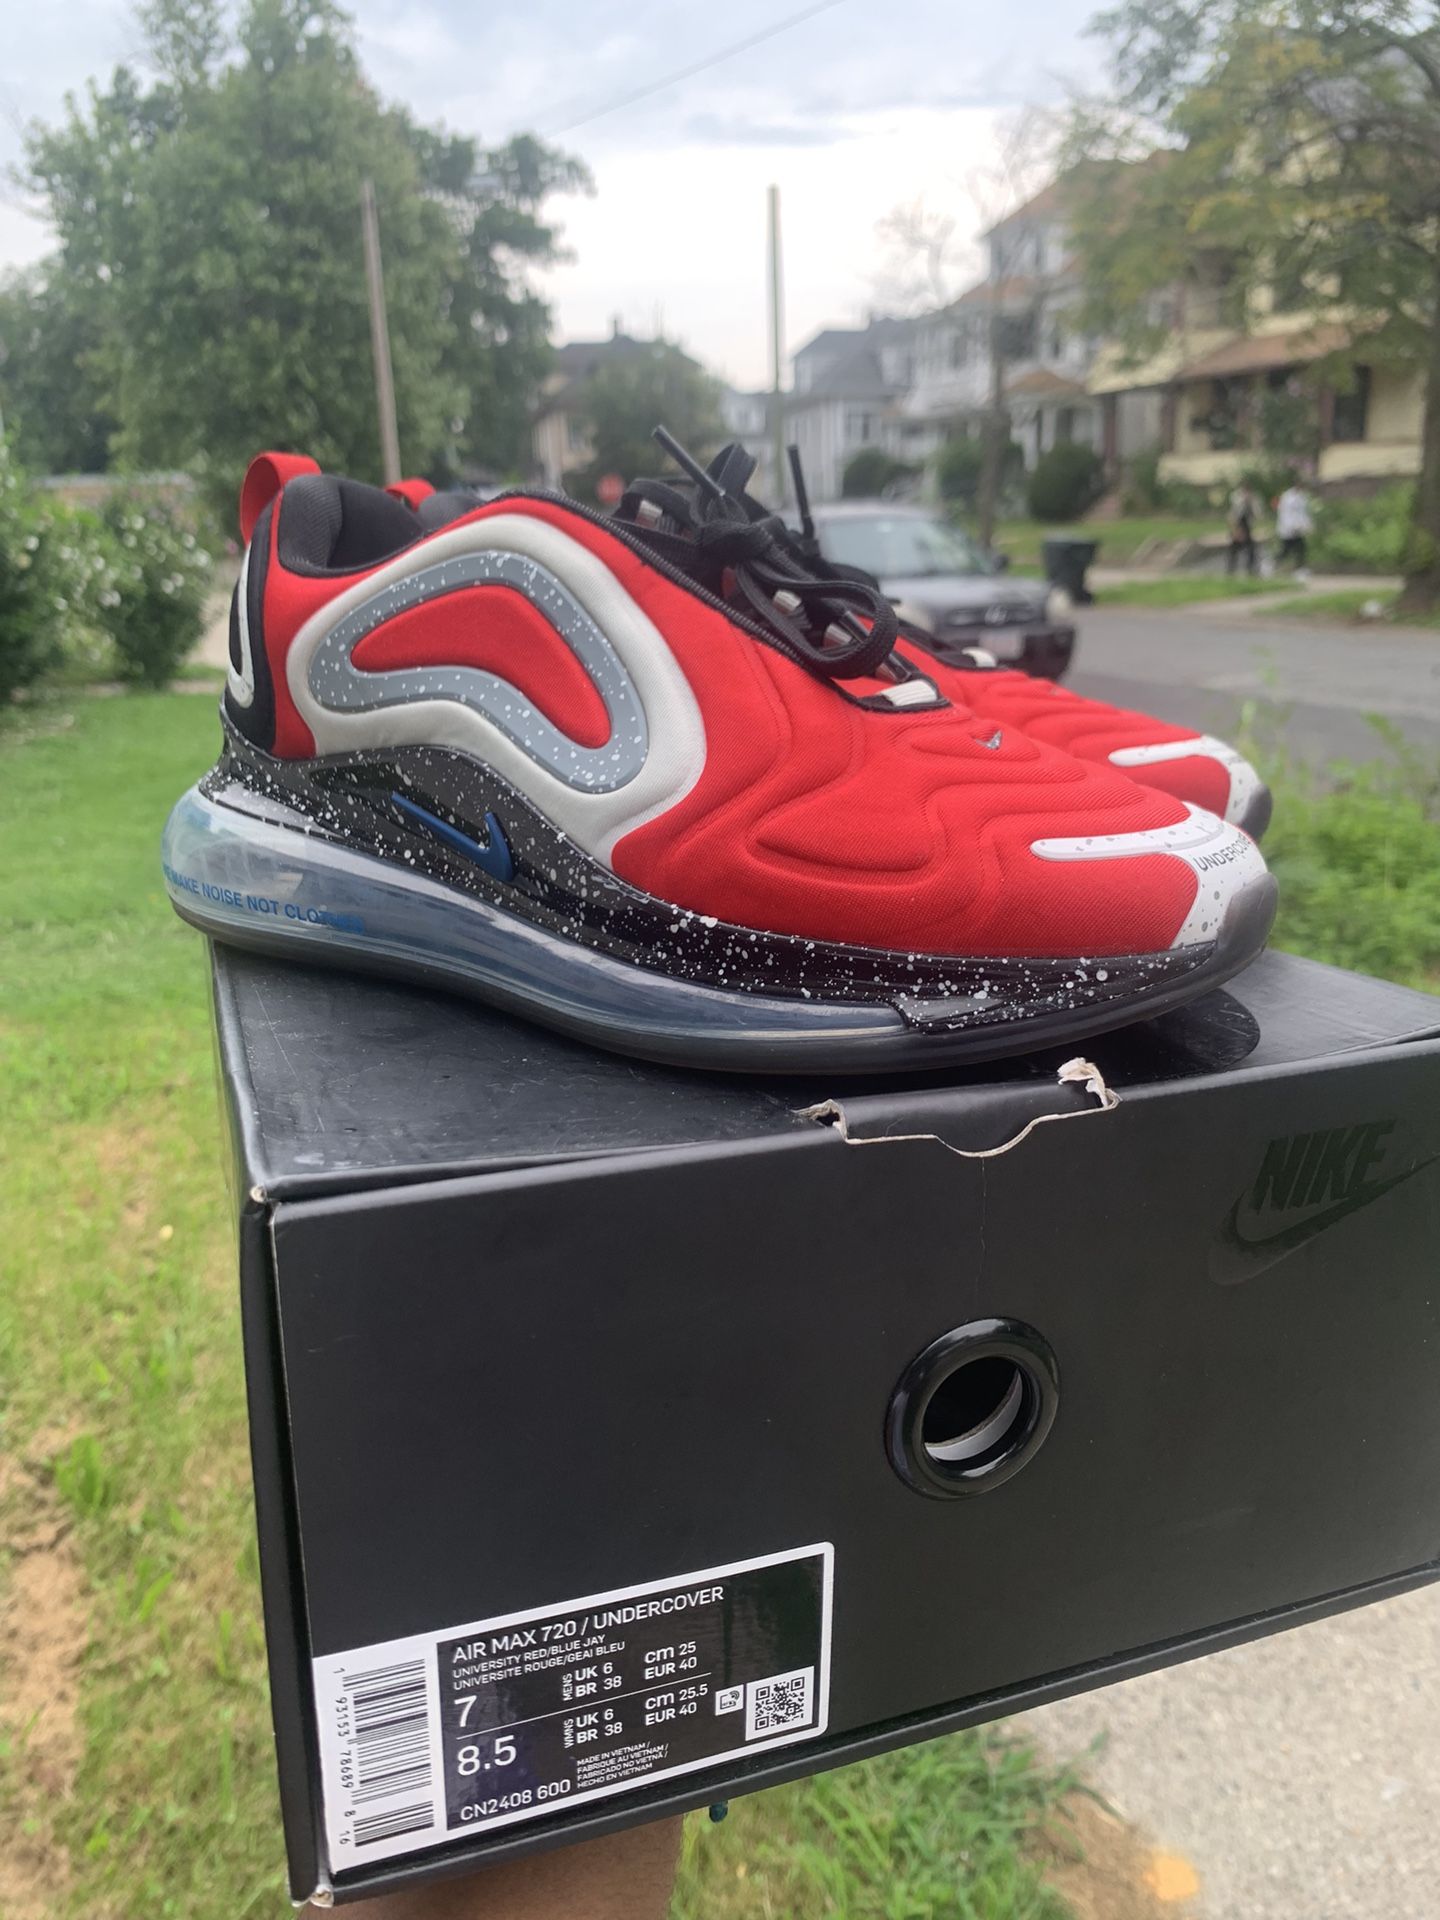 Undercover x Nike Air Max 720 University Red